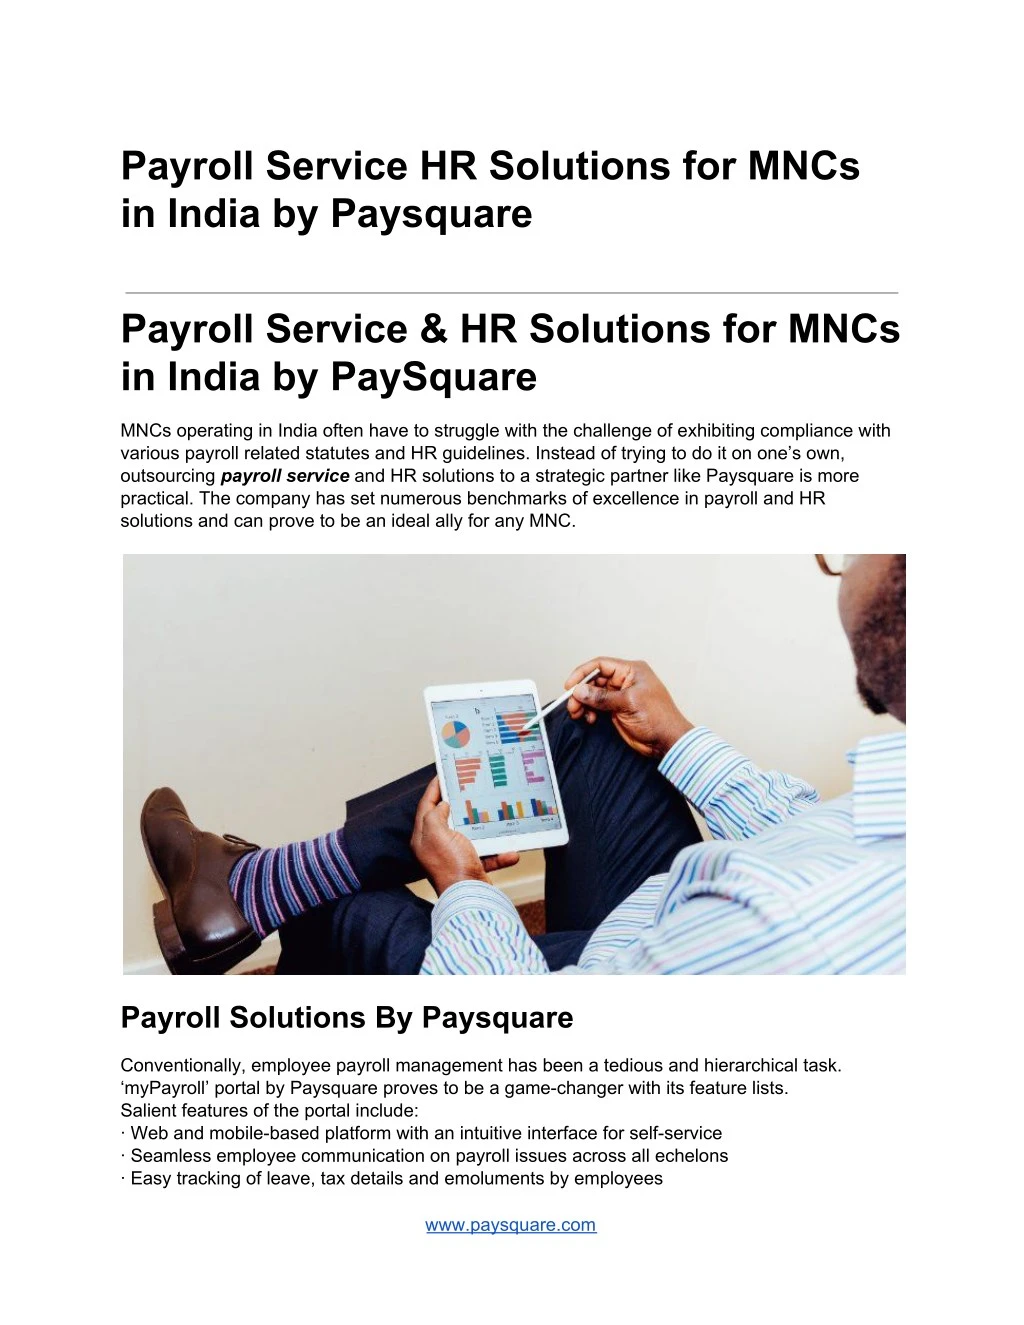 payroll service hr solutions for mncs in india